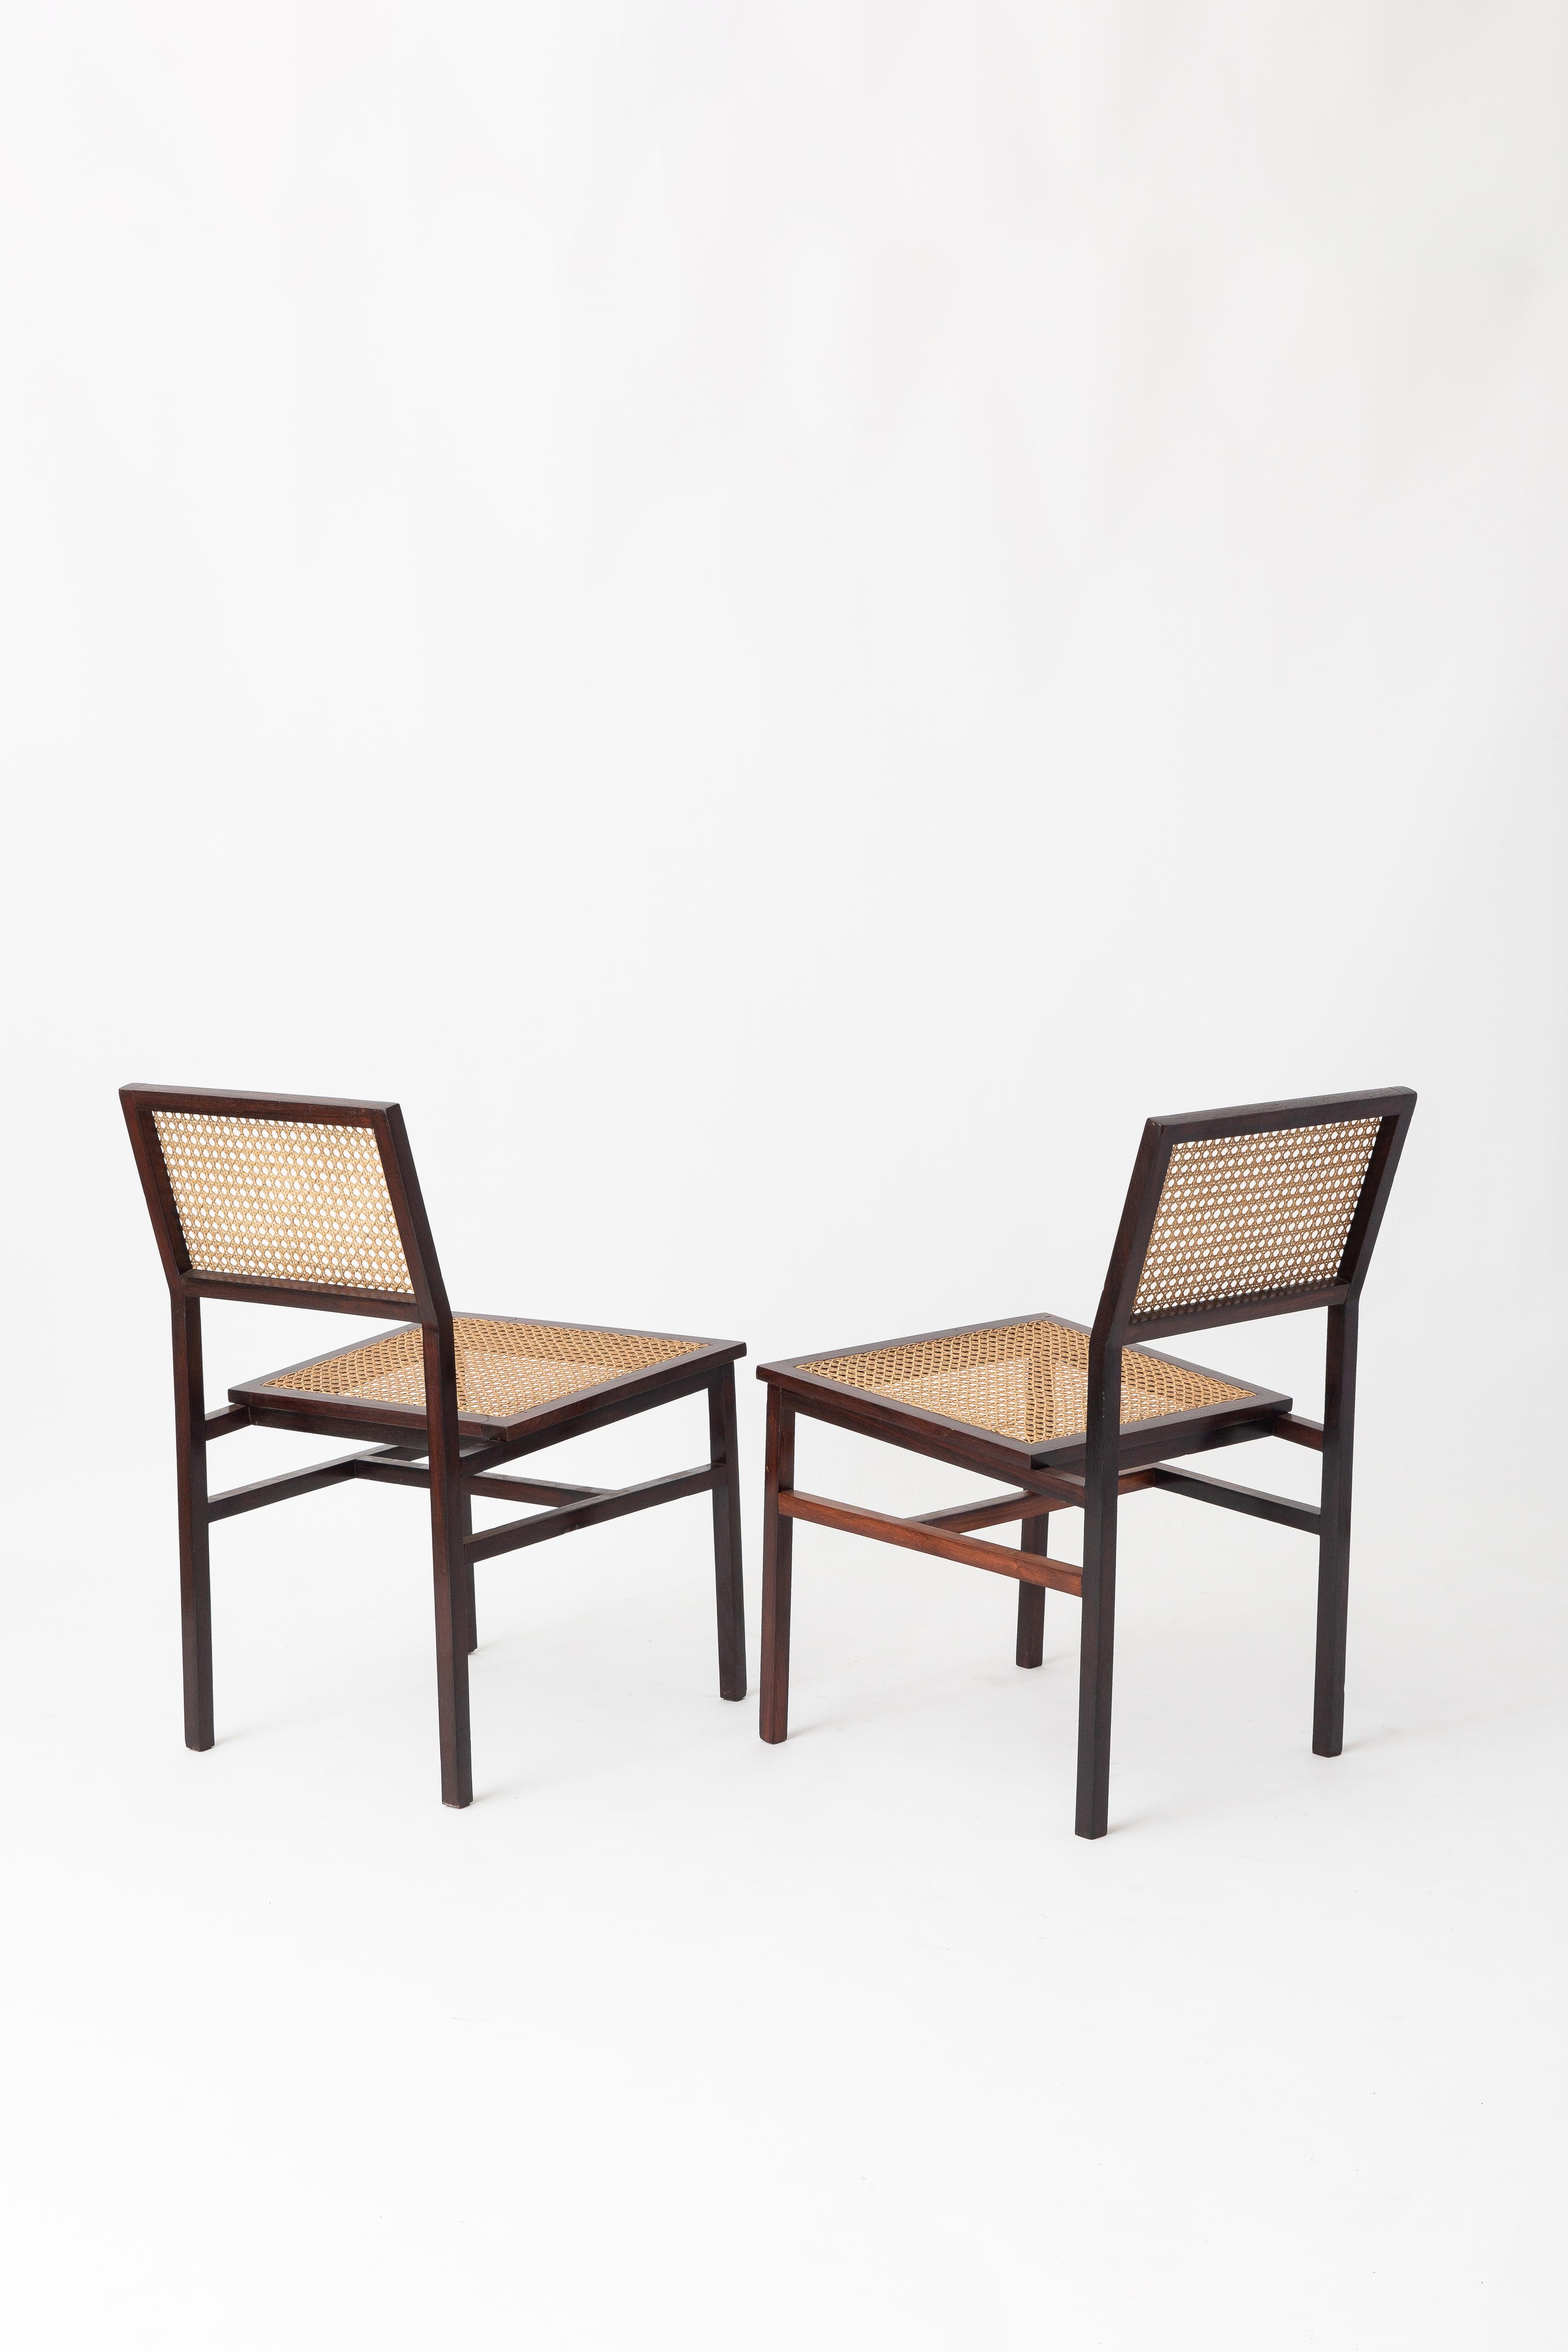 Brazilian Tenreiro pair of wood and cane chairs (with original label) For Sale